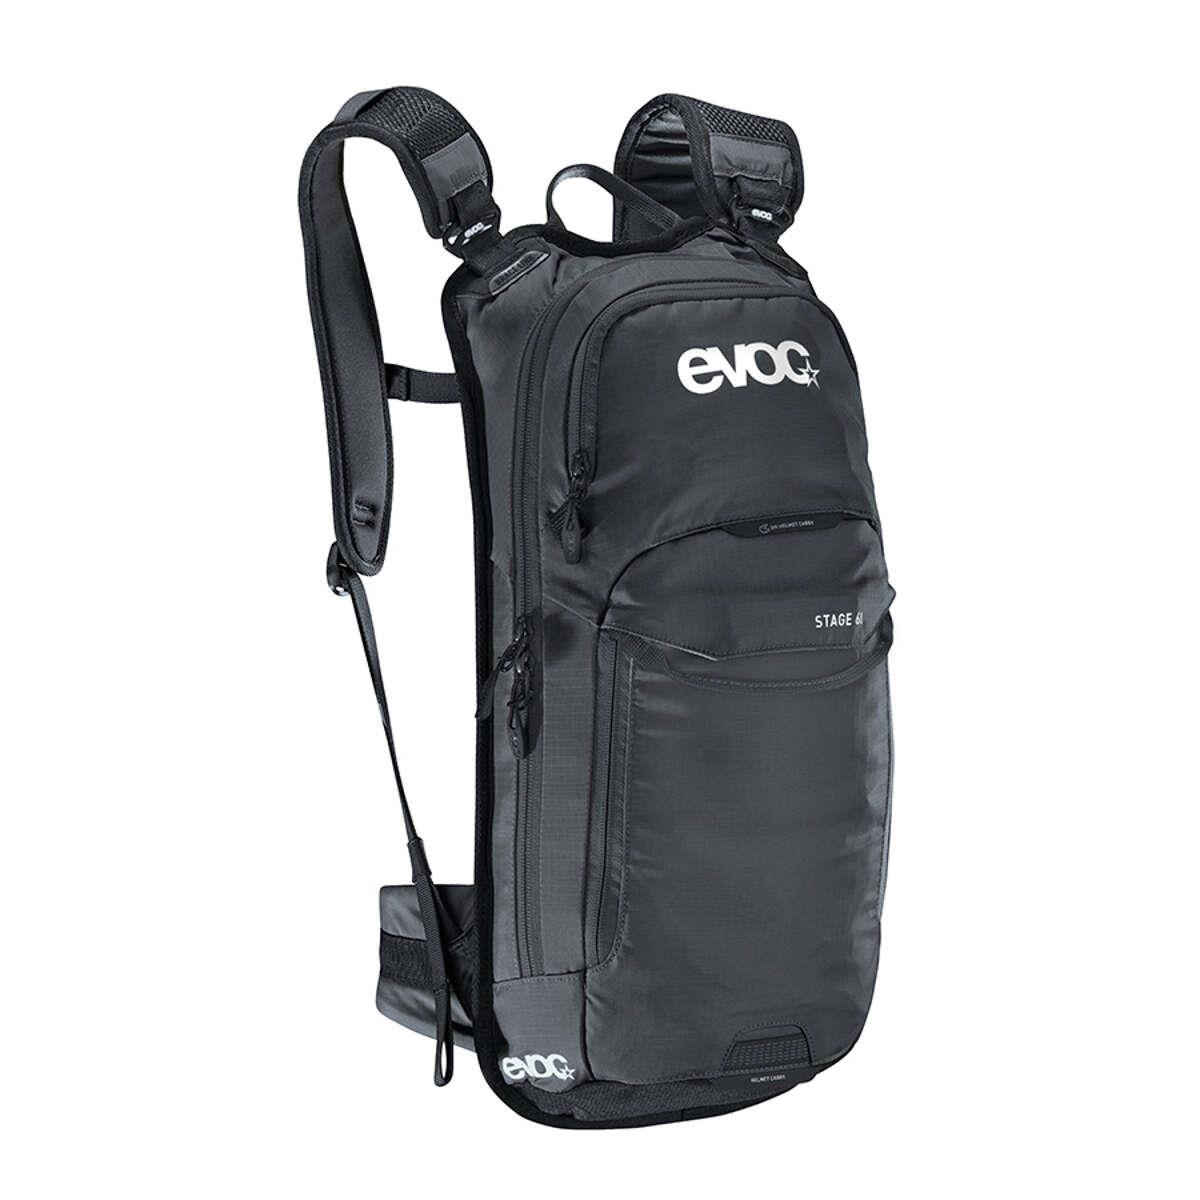 Evoc Protector-Backpack with Hydration System Compartment FR Enduro Black, 16 liter